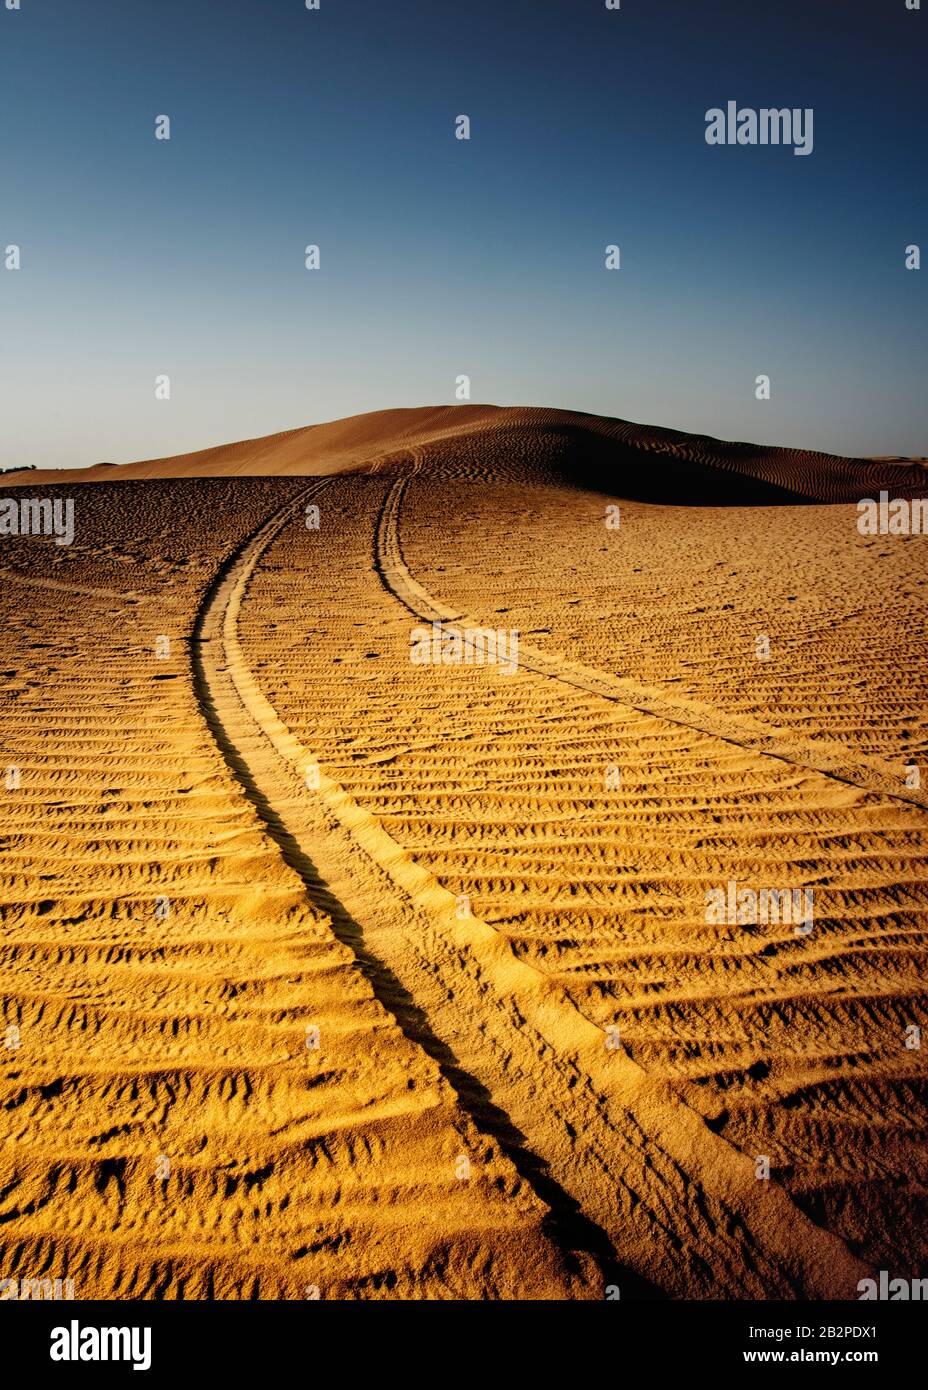 color image taken at dusk, abstract view of Tyre tracks through,the desert, Stock Photo